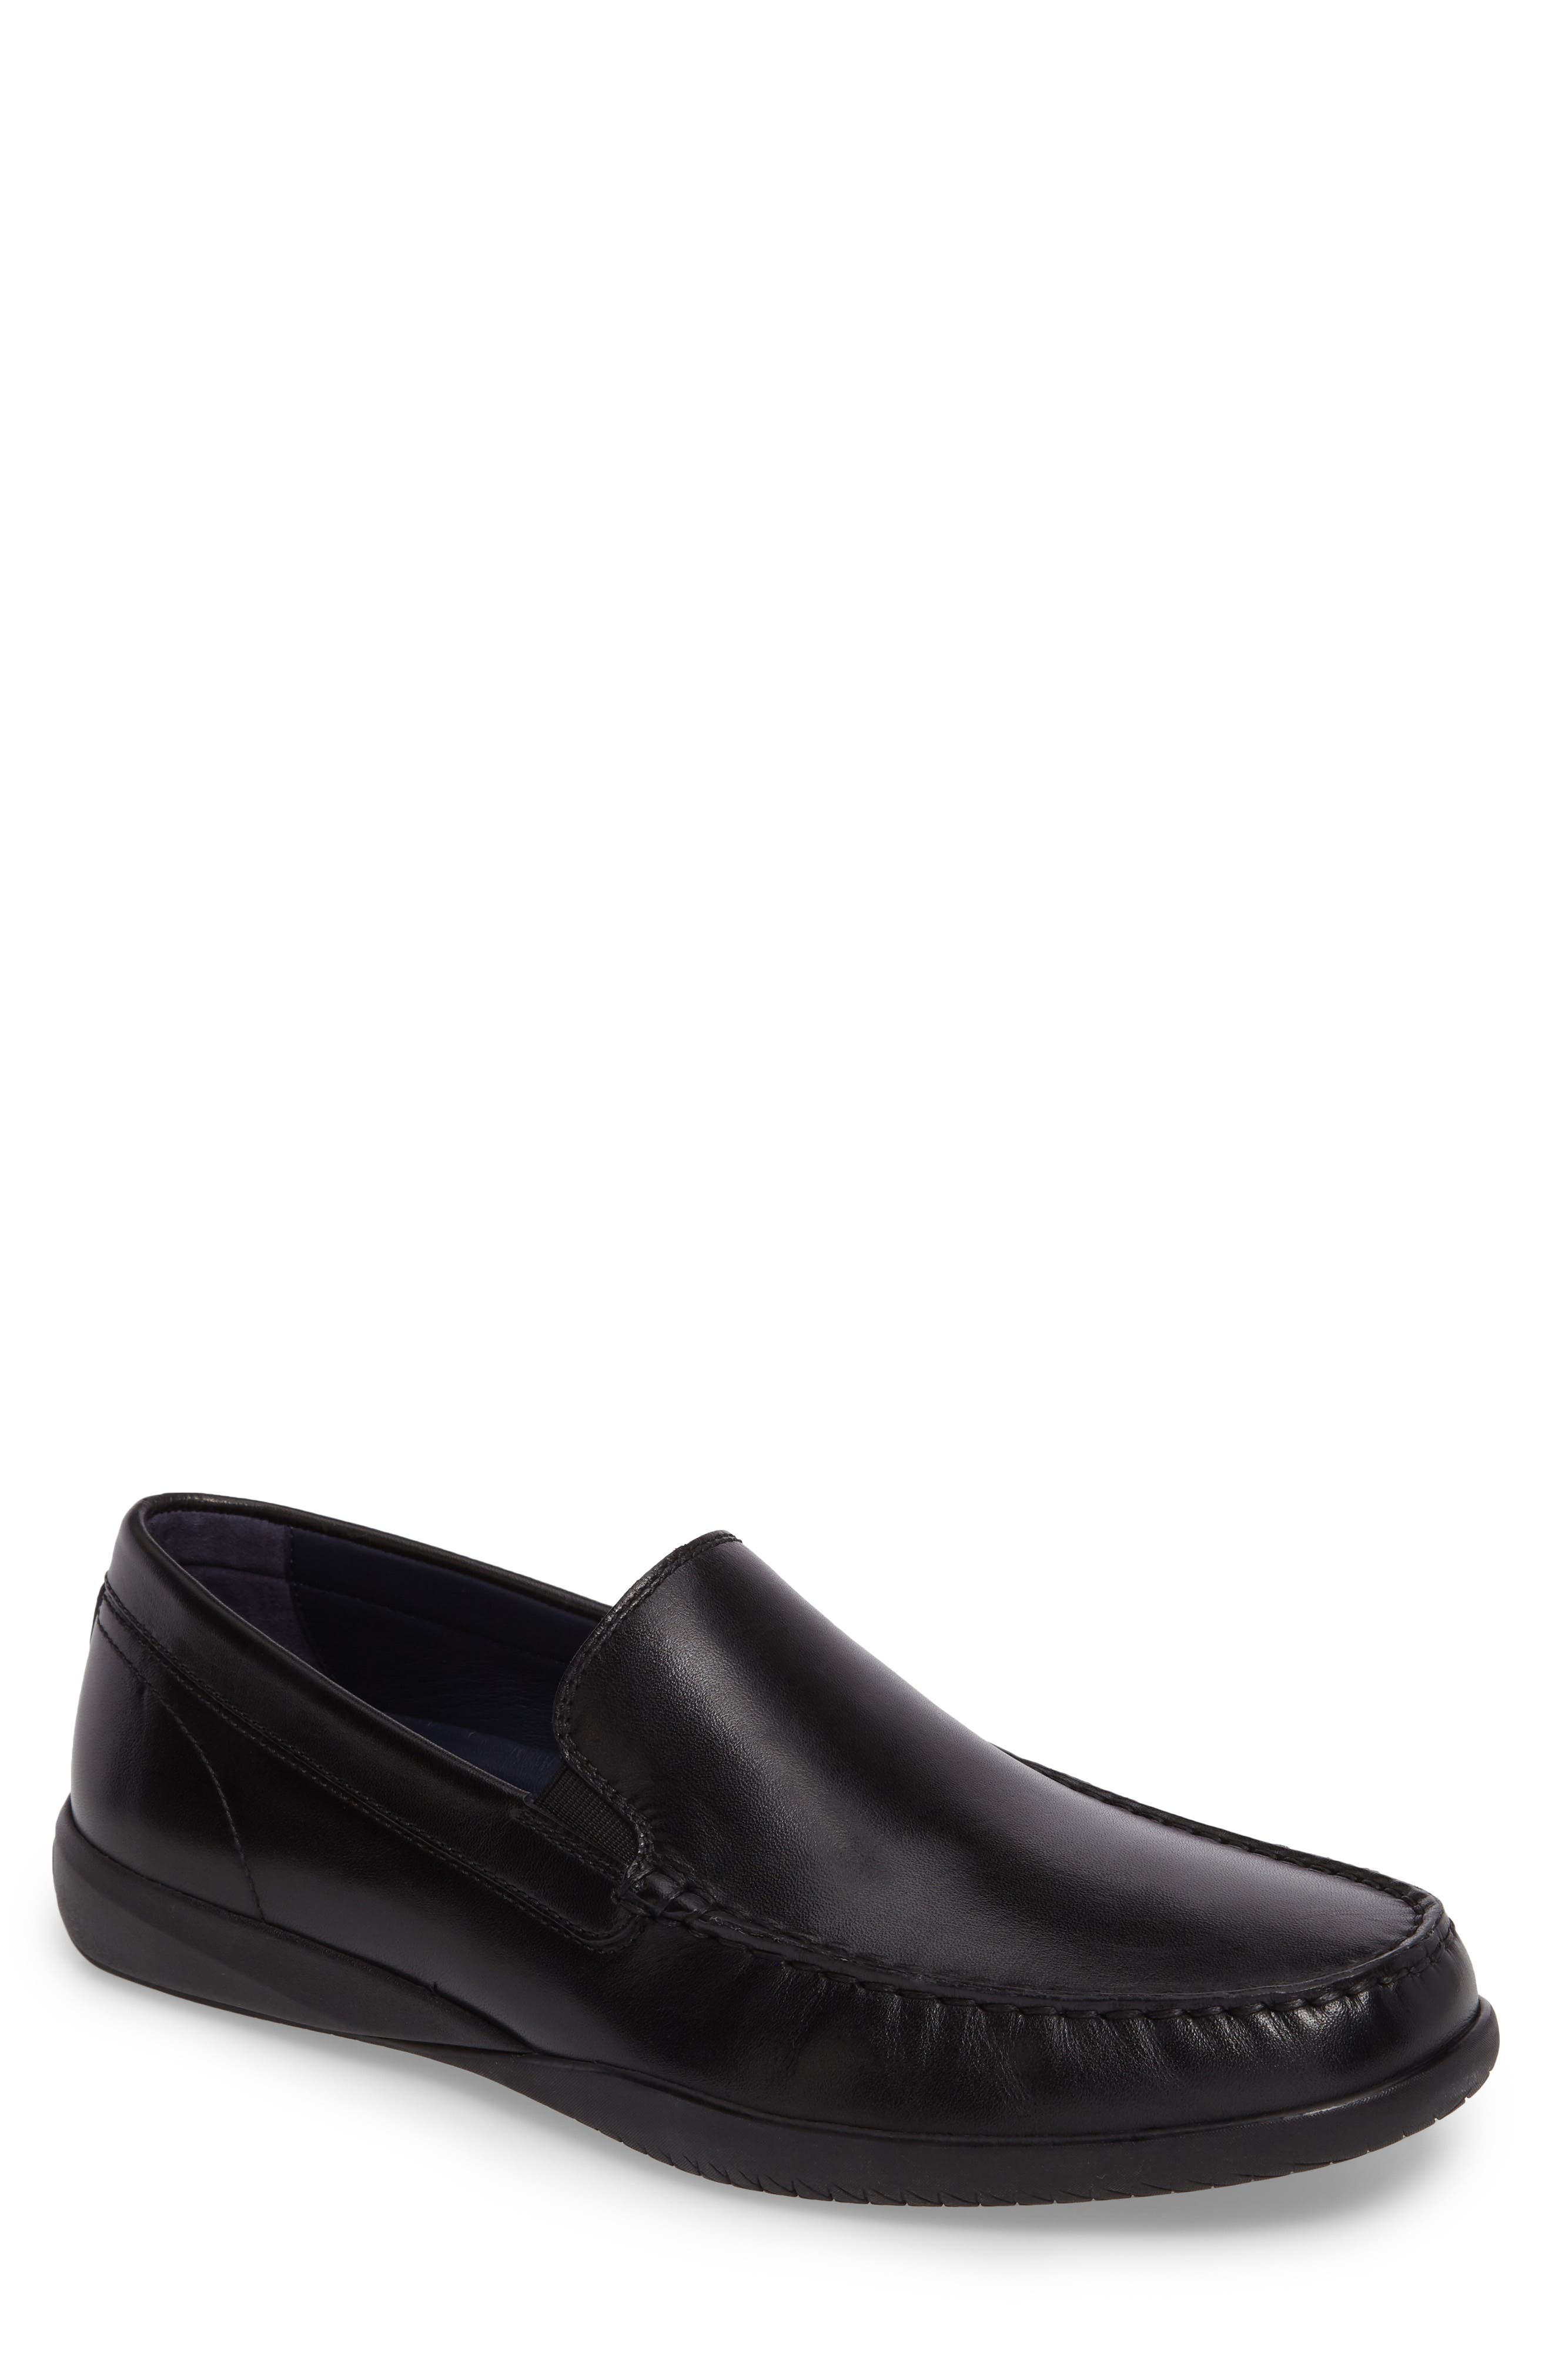 cole haan loafers canada